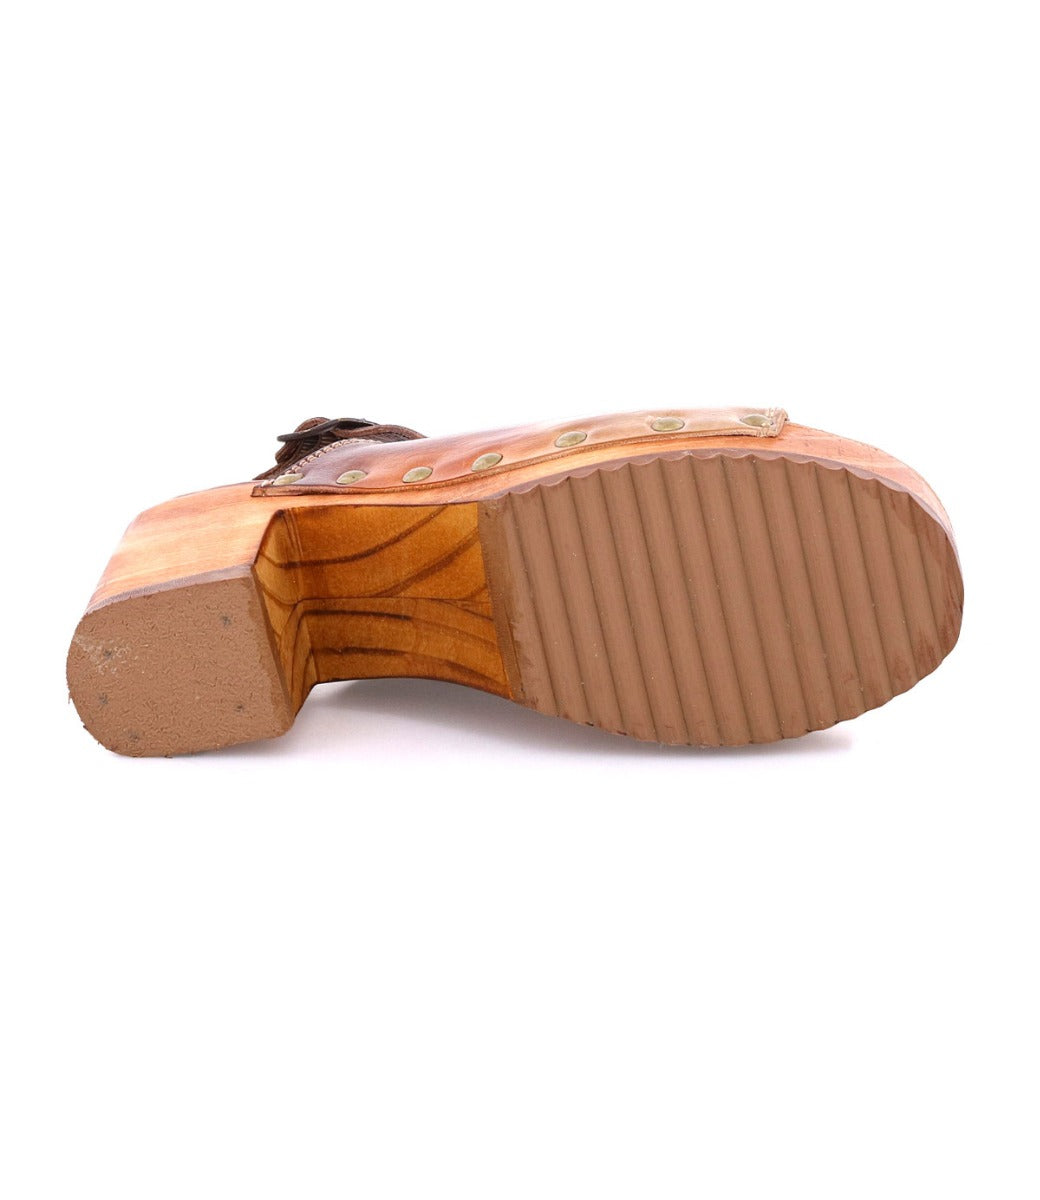 A Marie shoe by Bed Stu with a wooden sole on a white background.